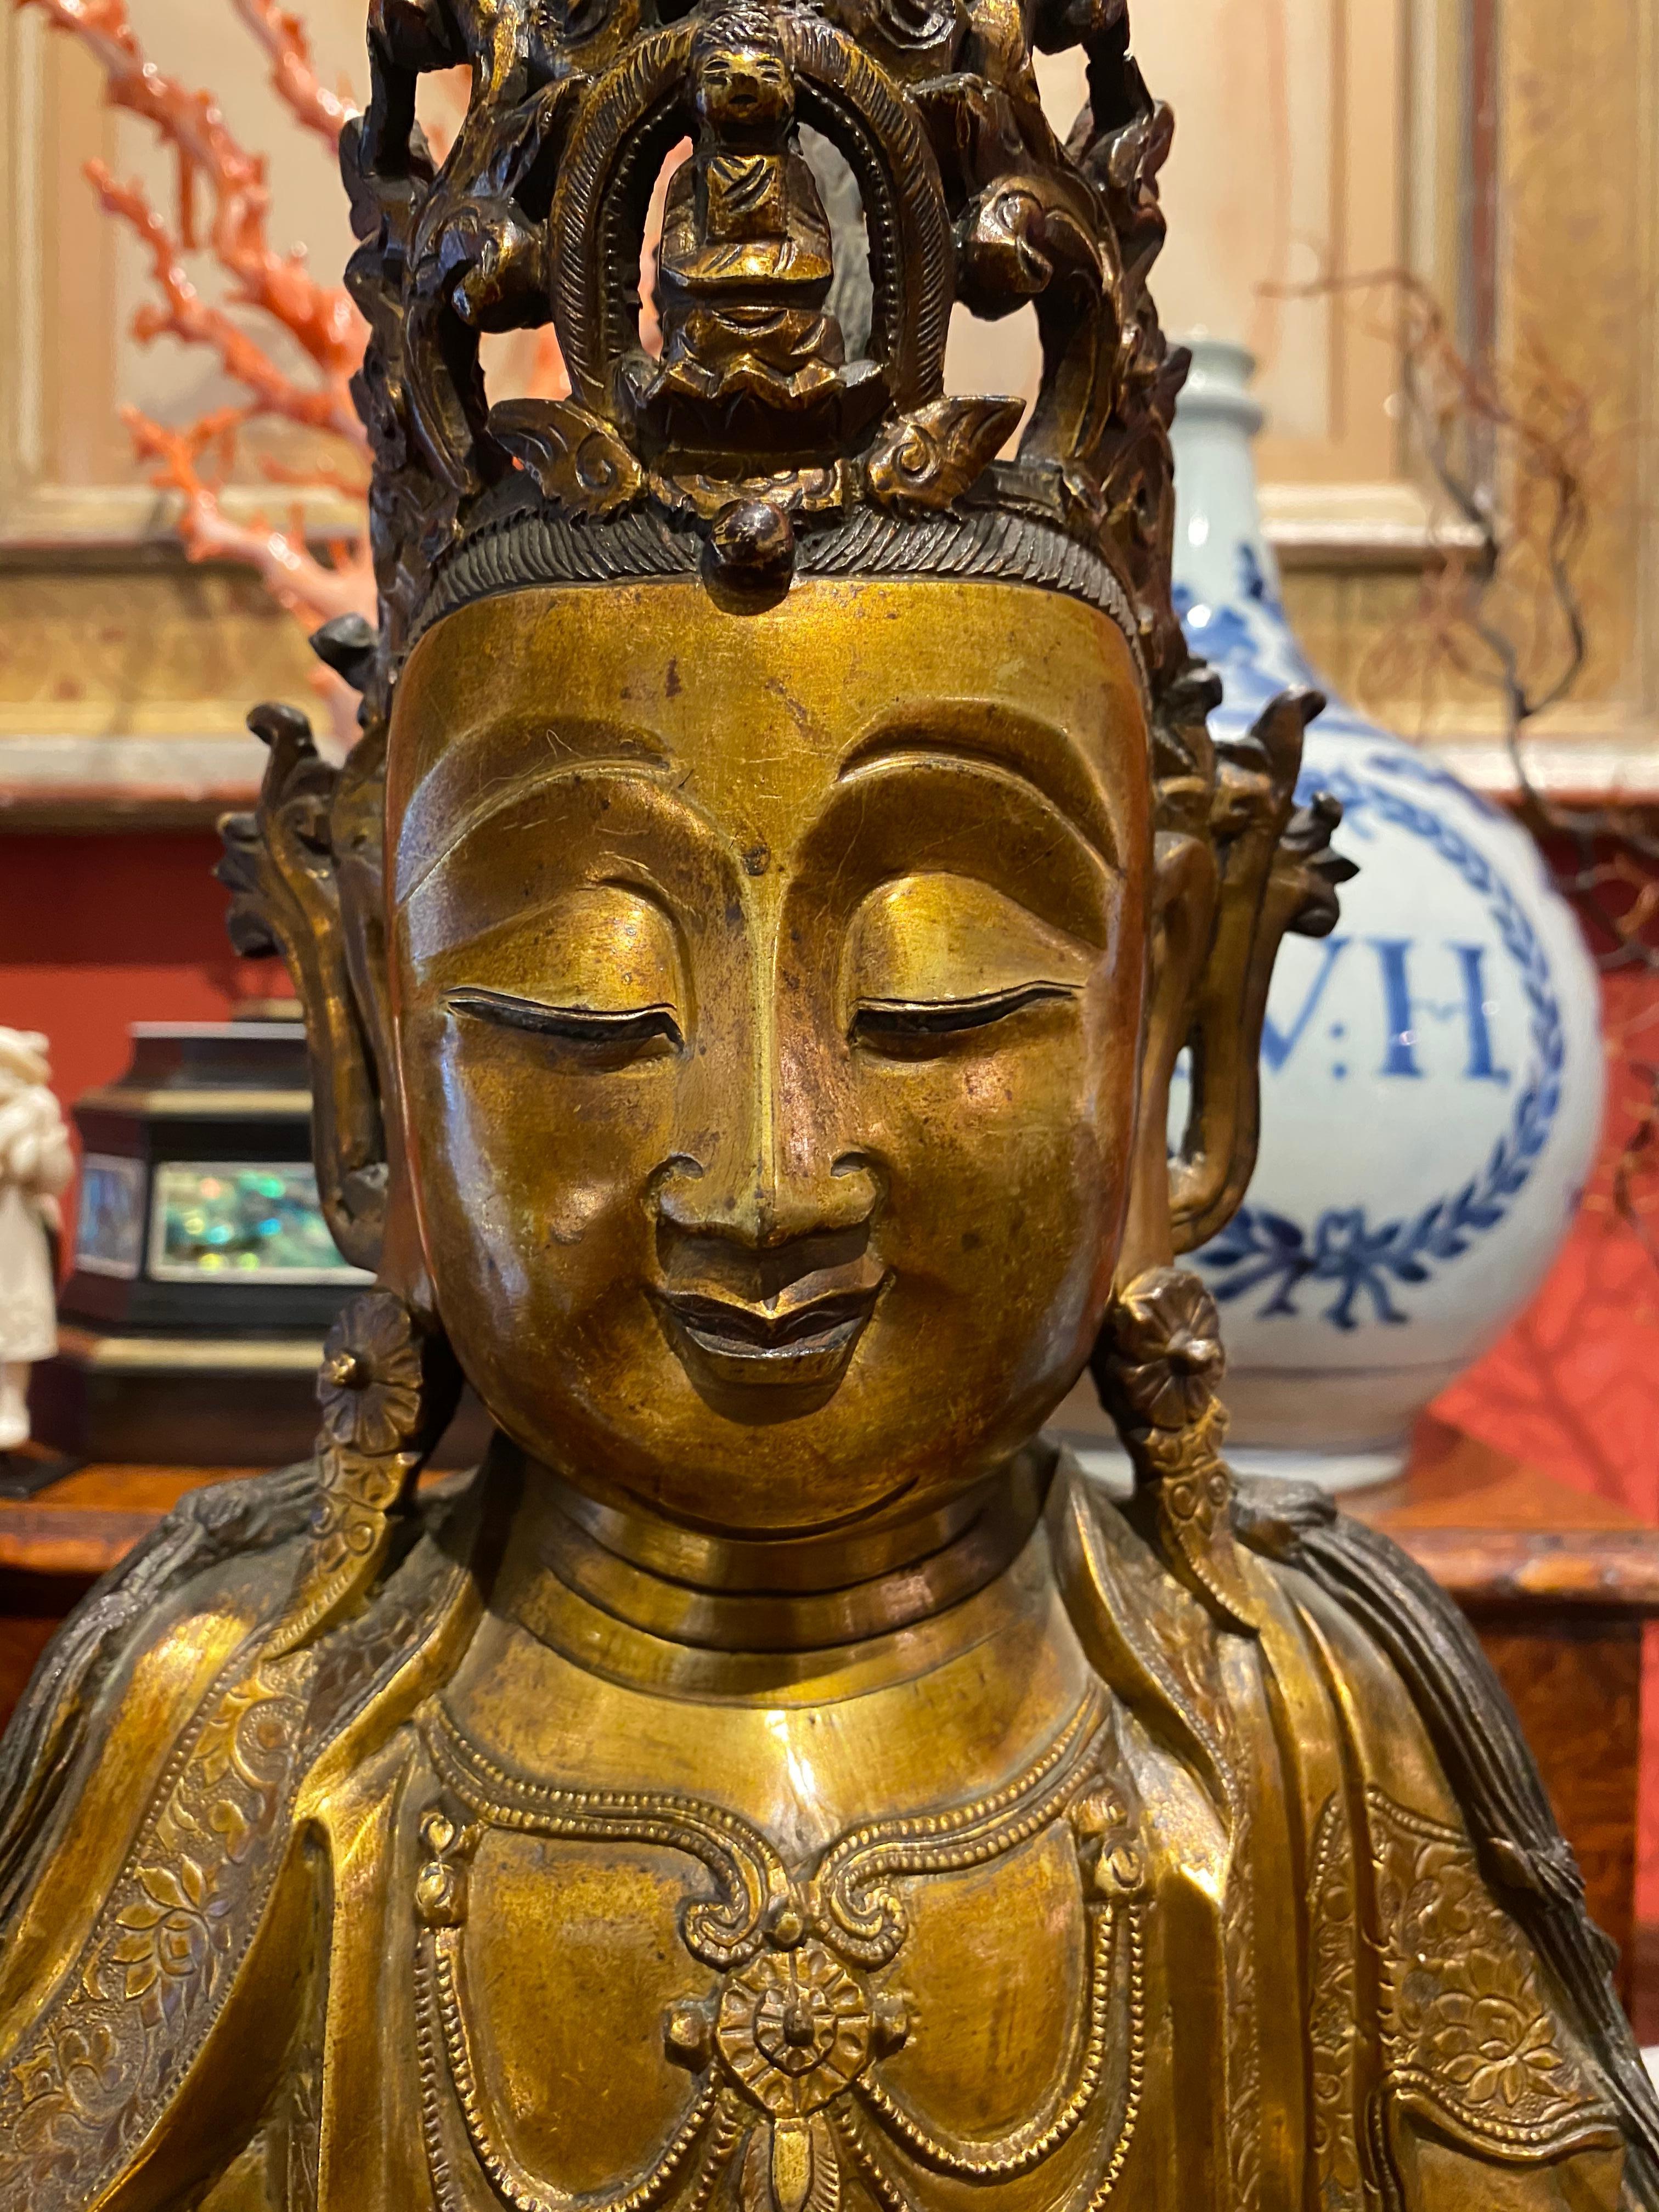 18th Century and Earlier Very Fine and Serene Chinese Gilt-Bronze Figure of Guanyin, 16th Century